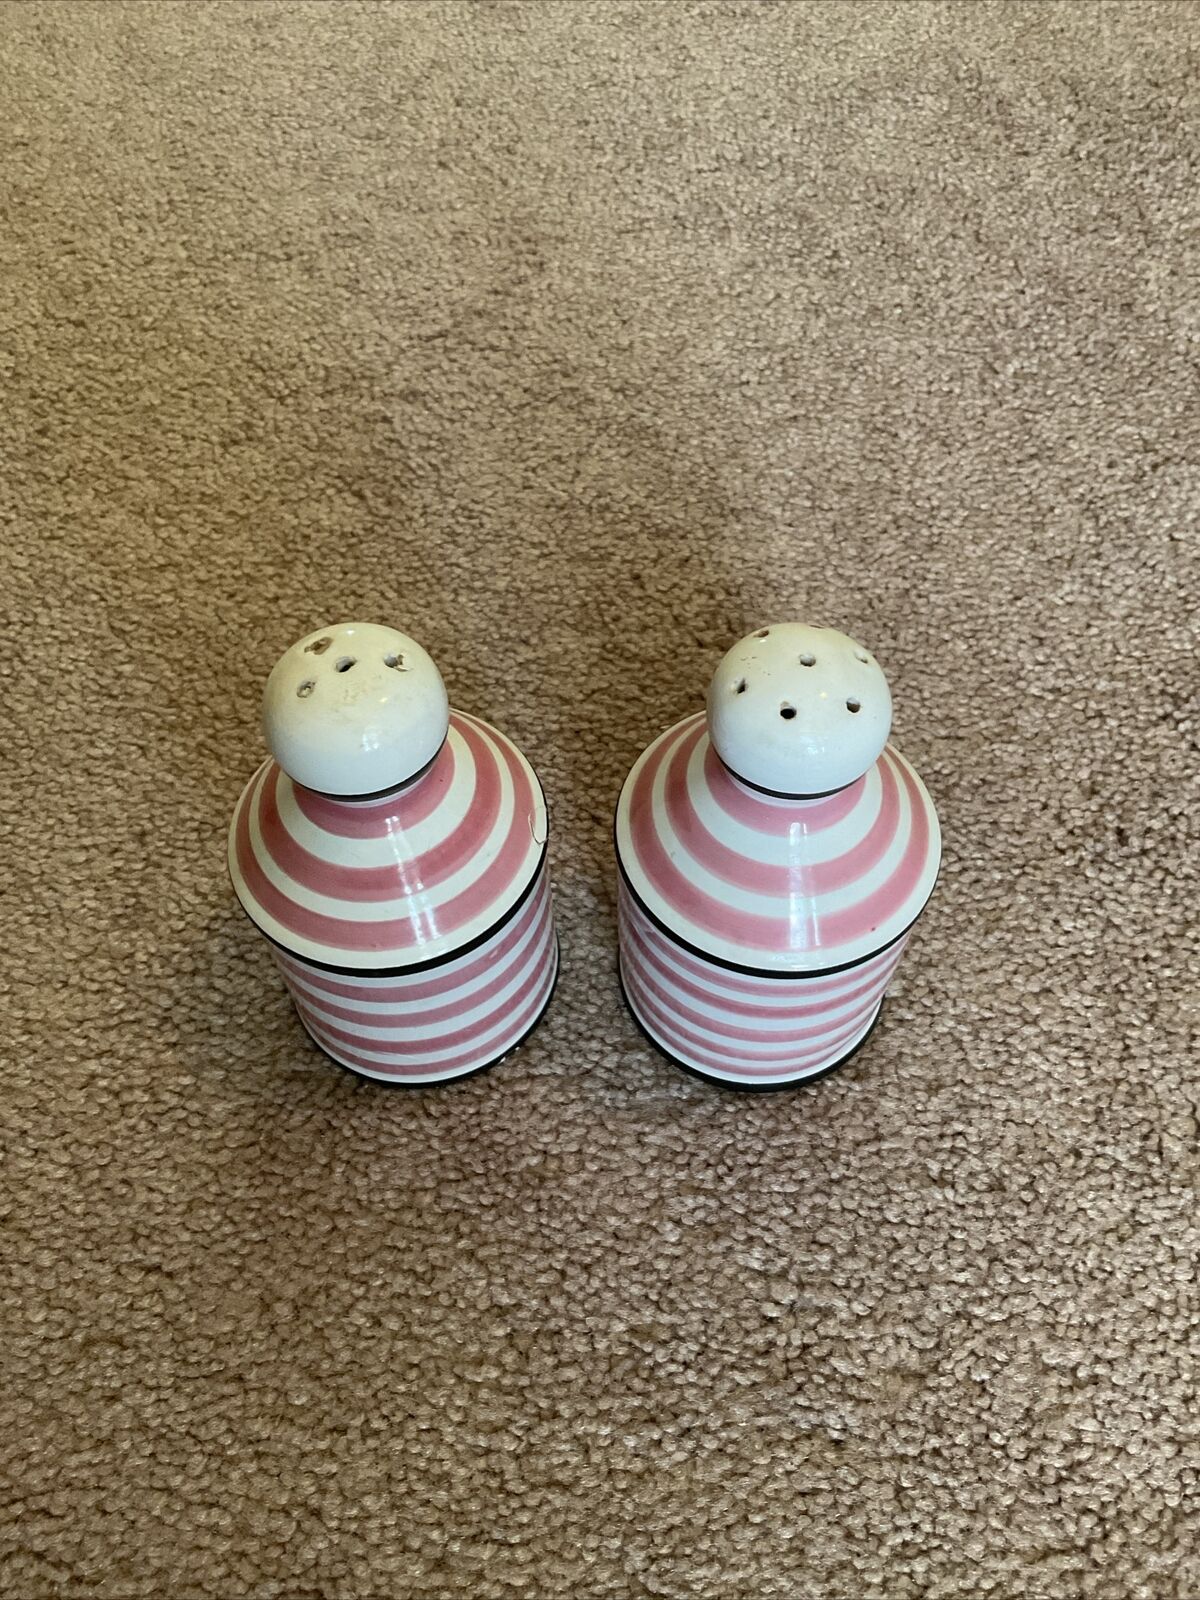 Vintage Salt And Pepper Shakers Pink And White Stripes Marked ITALY